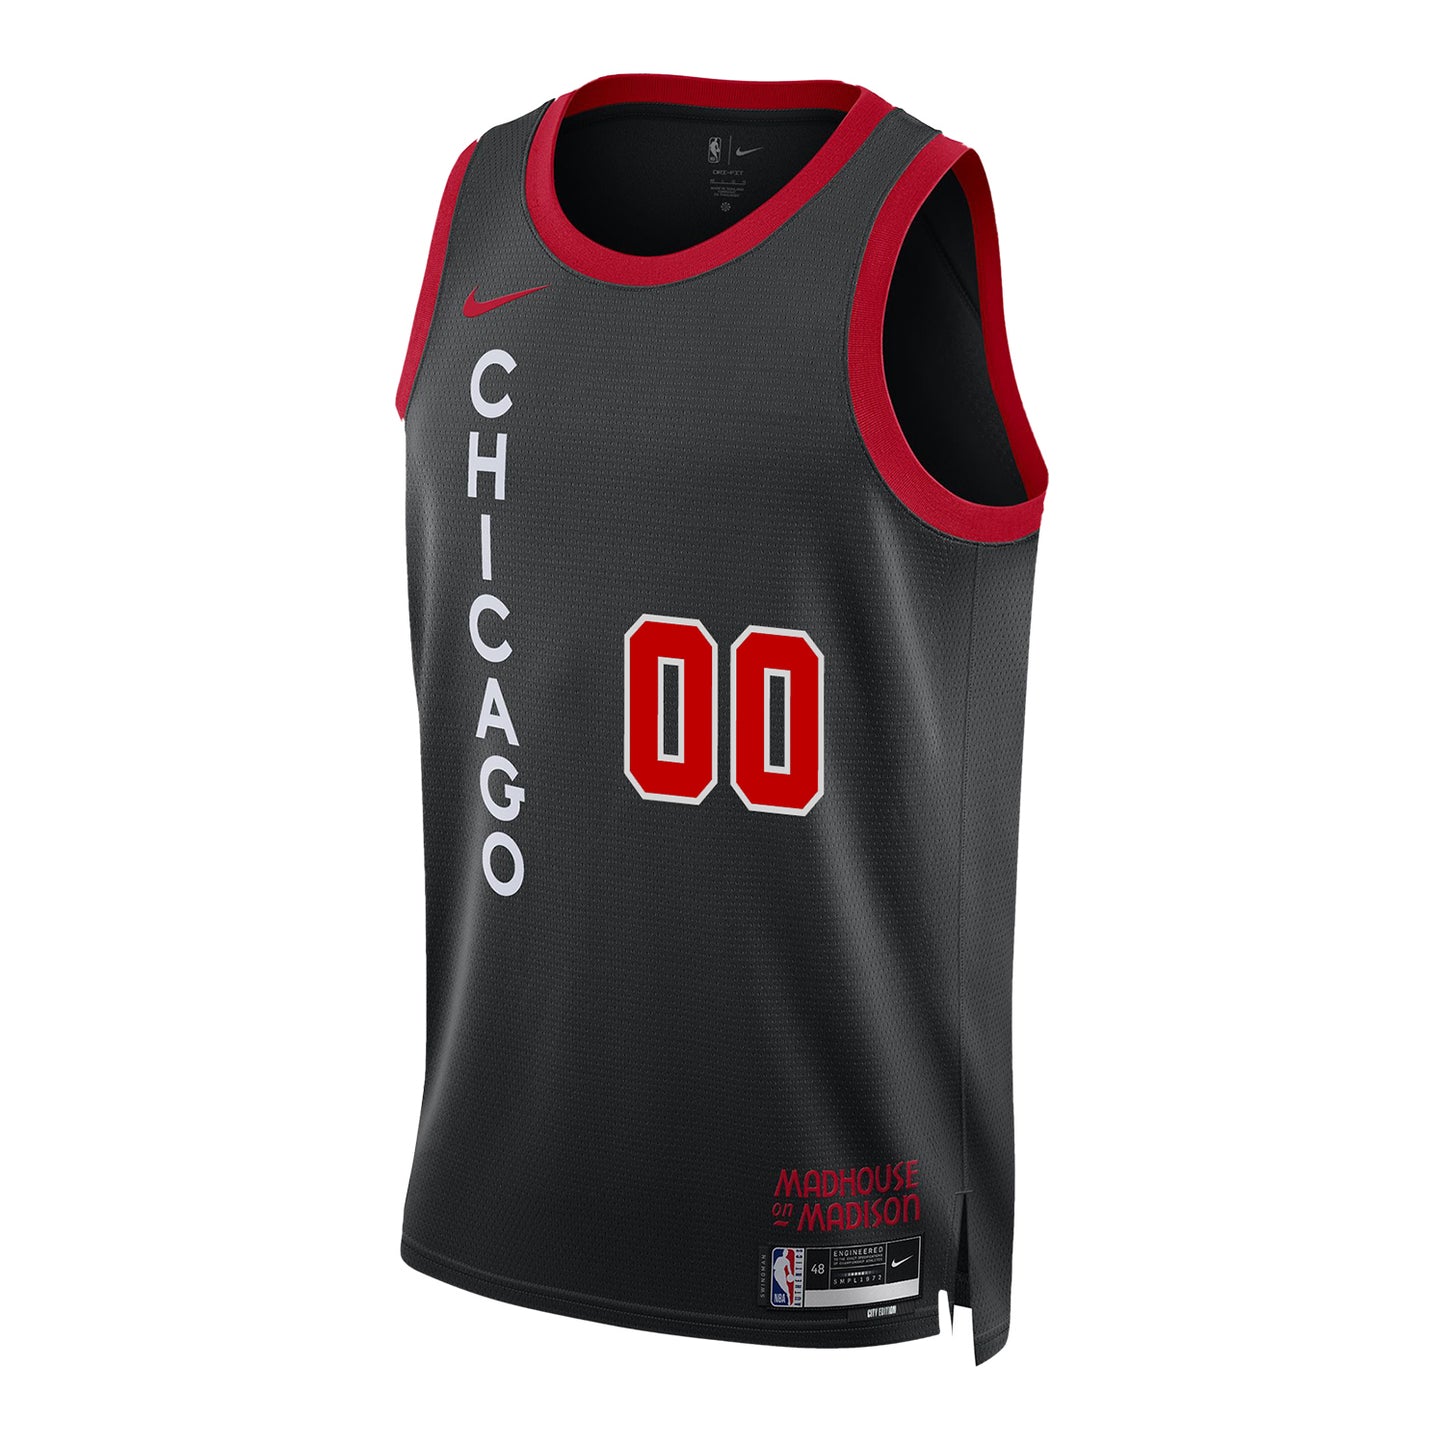 2023-24 CHICAGO BULLS PERSONALIZED CITY EDITION YOUTH UNIFORM - front view